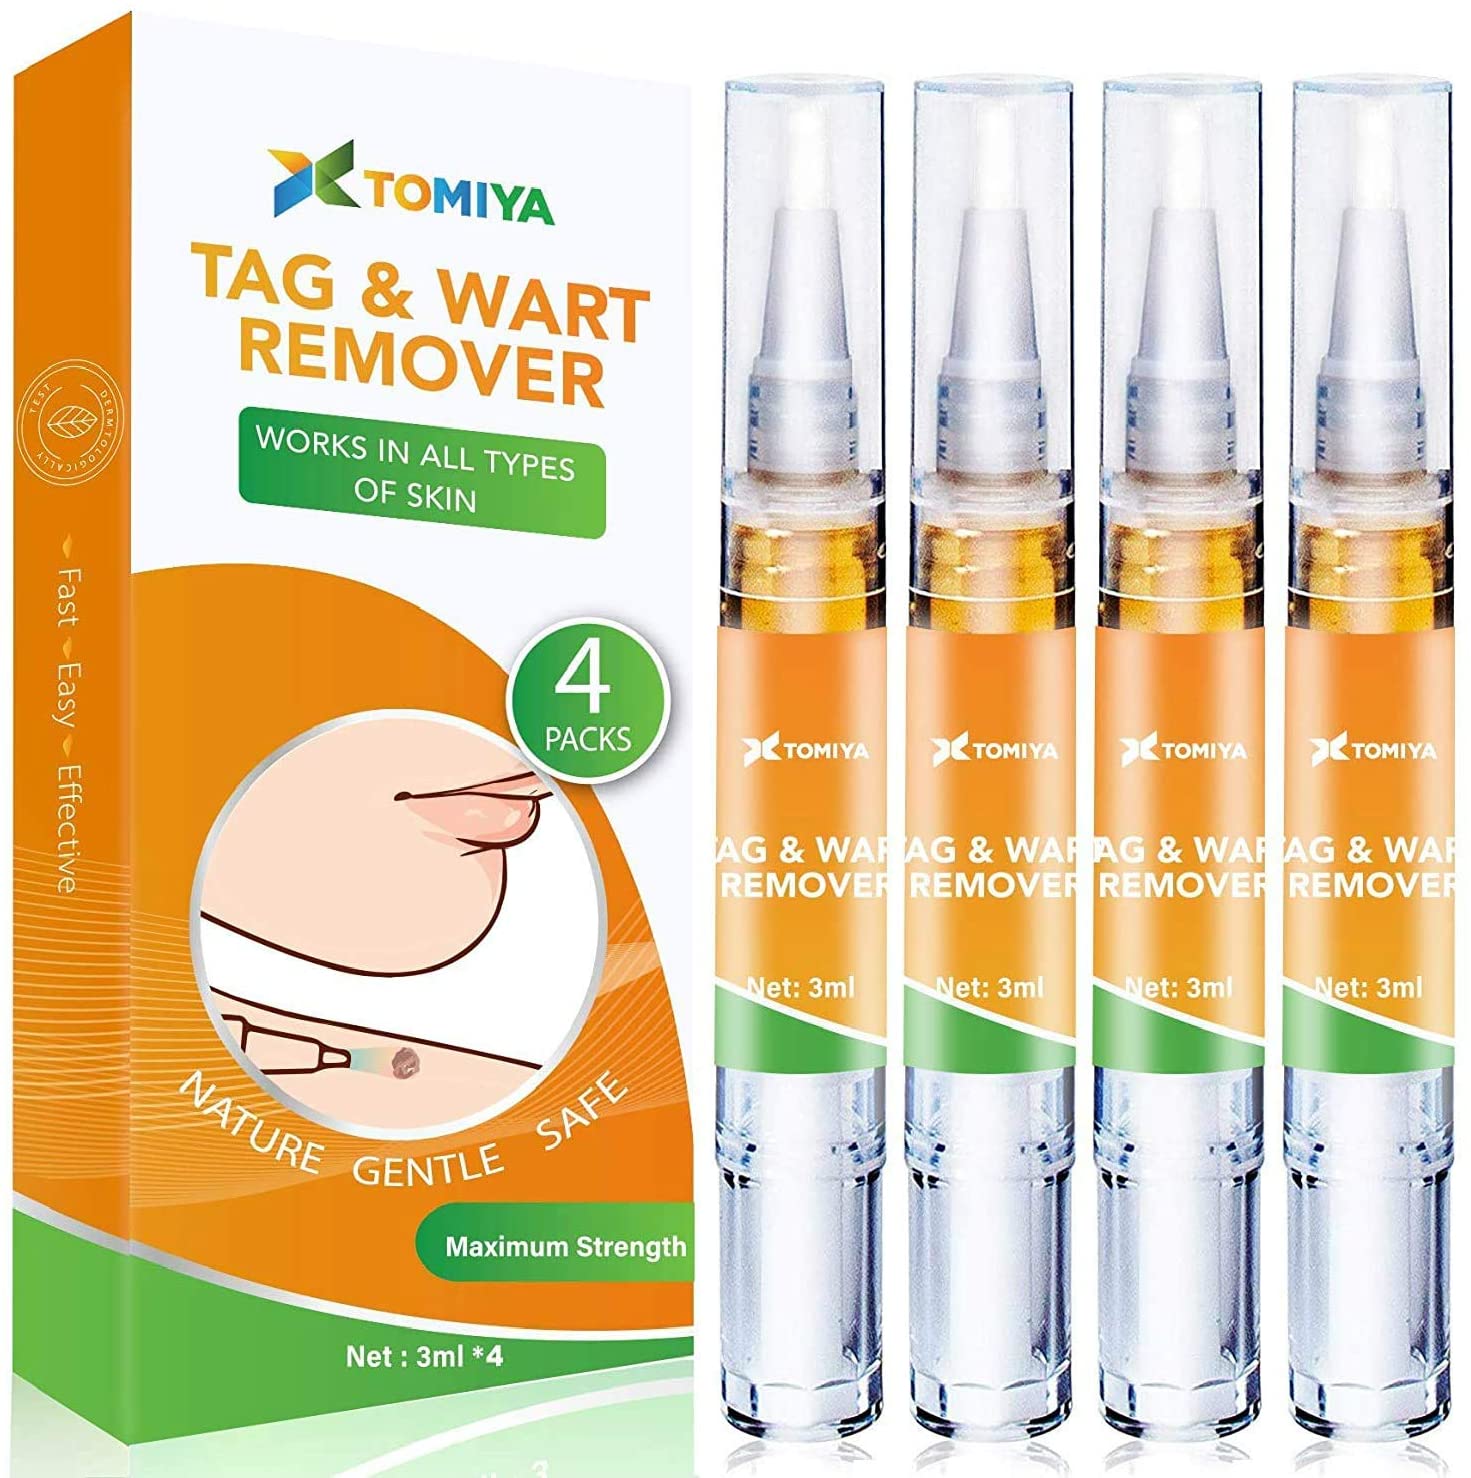 Skin Tag and Acne Remover Wart Remover